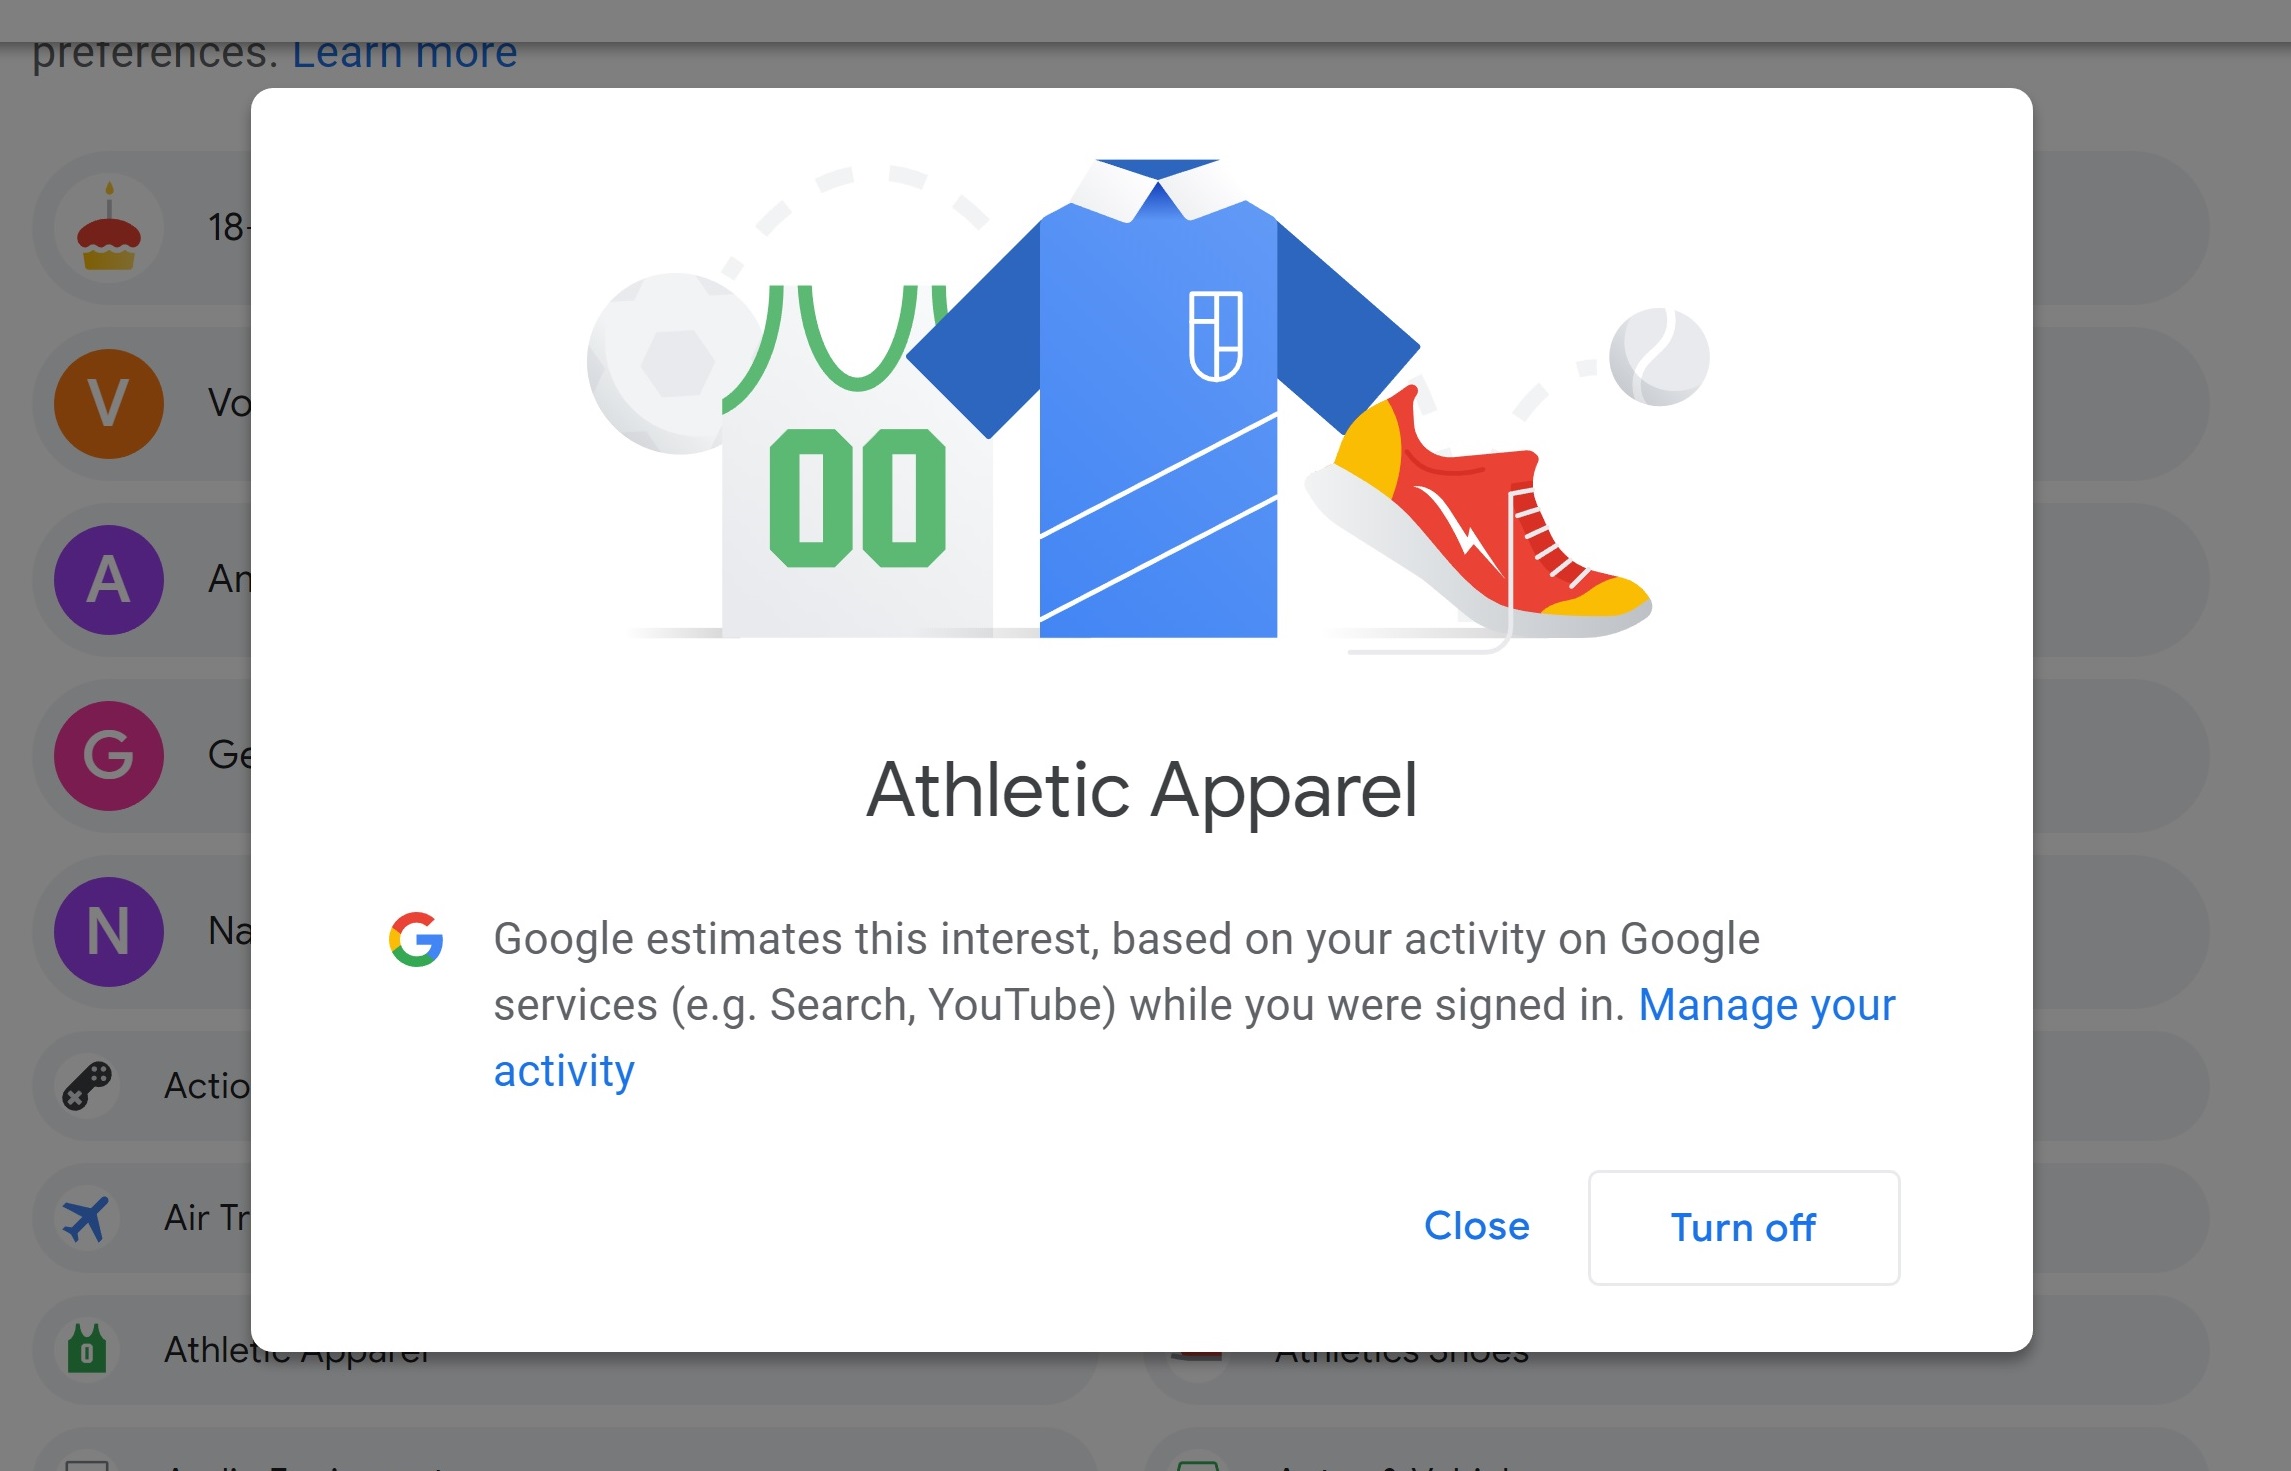 How to control the ads you see with Google's new personalization settings